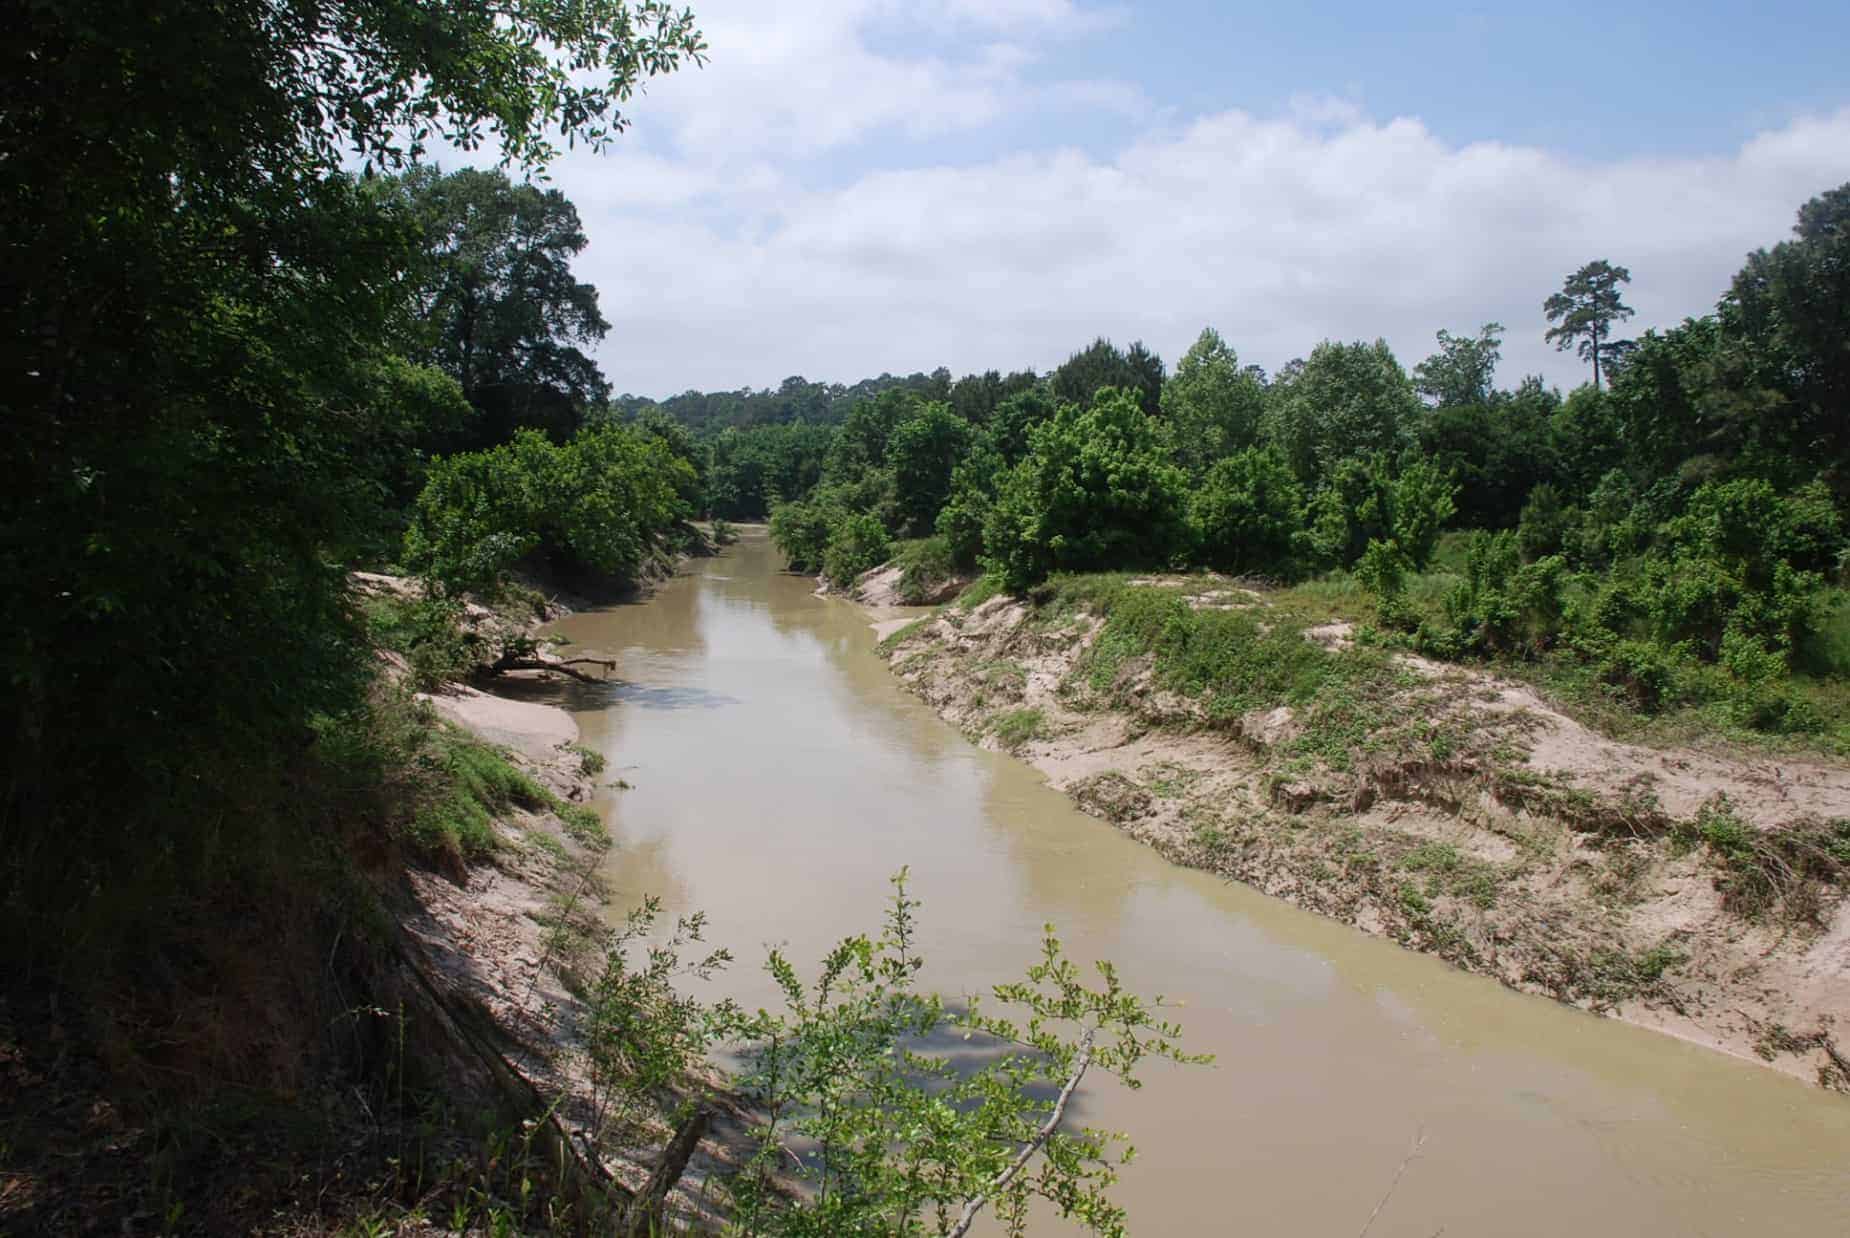 View of Cypress Creek from Northern Edge of 100 Acre Wood Preserve Houston TX along dirt hiking trail